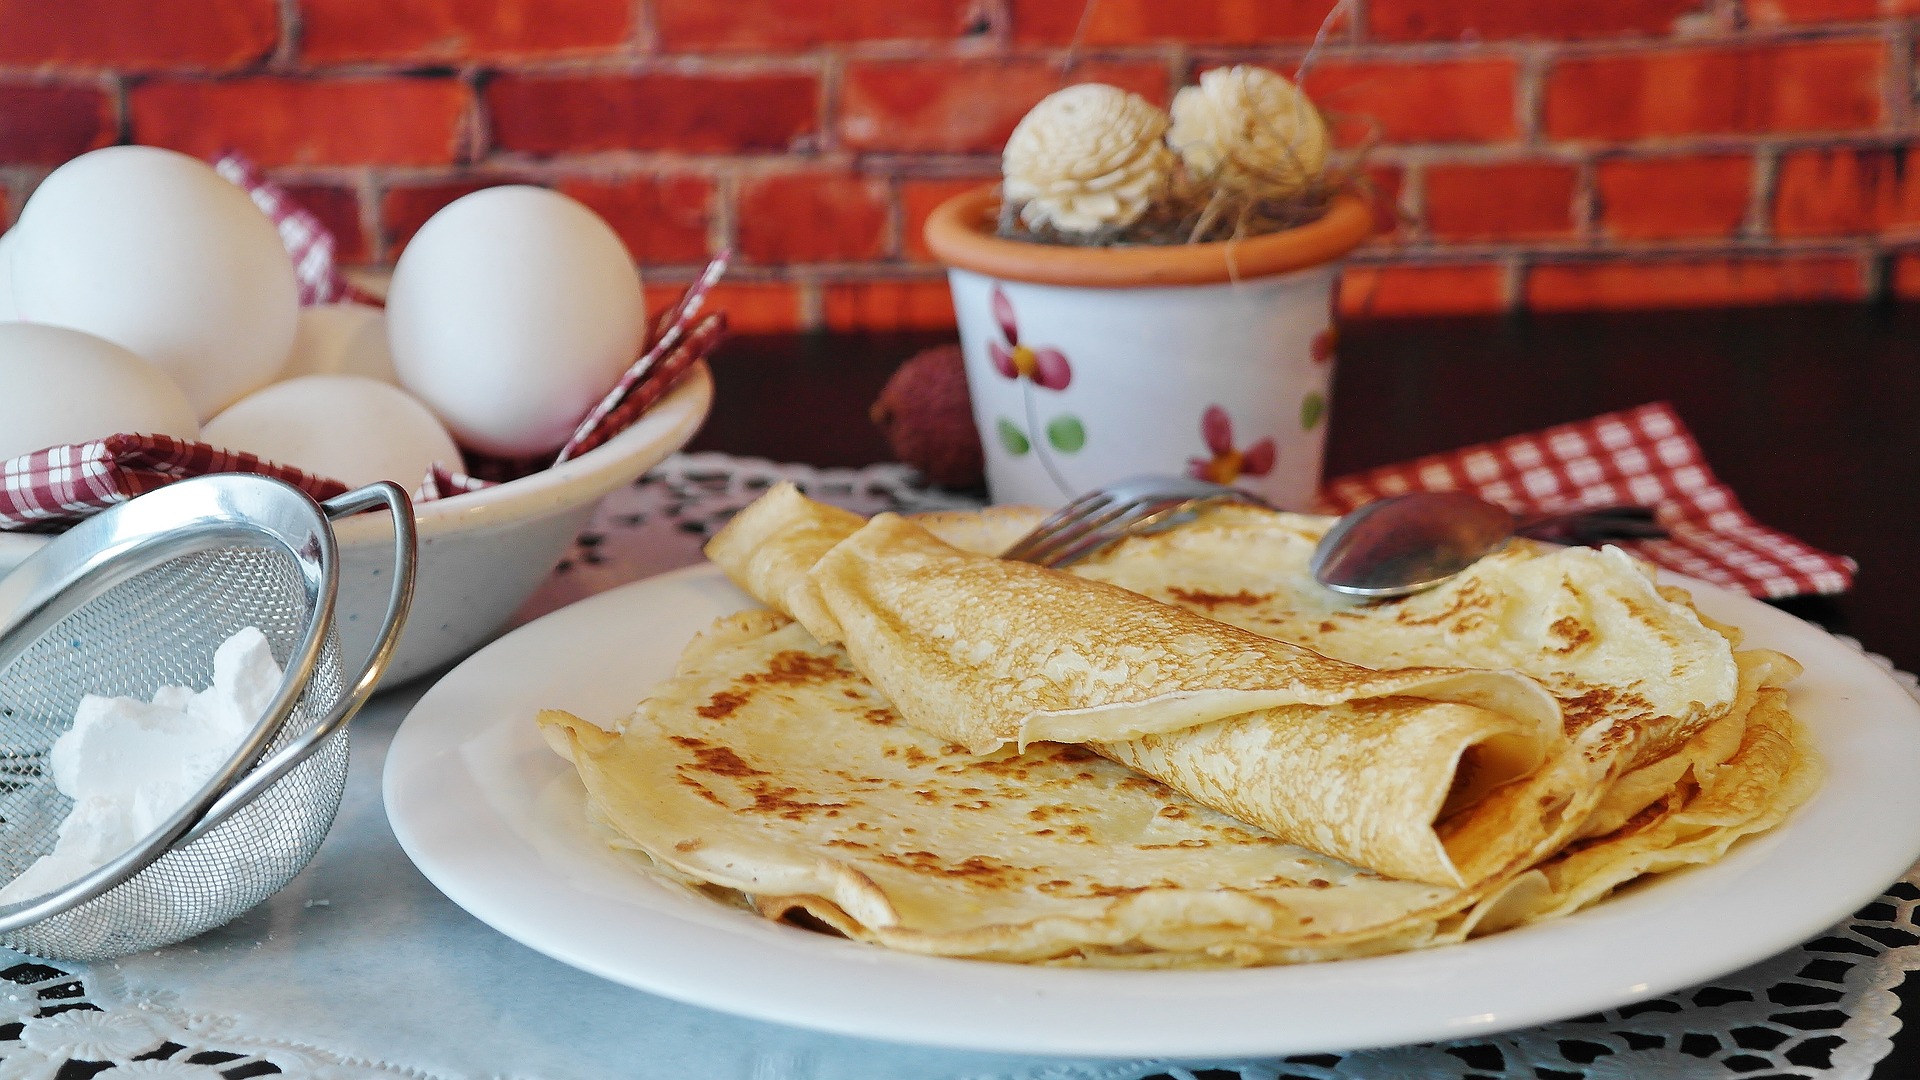 Enjoy crepes and more at your Panama City Beach brunch